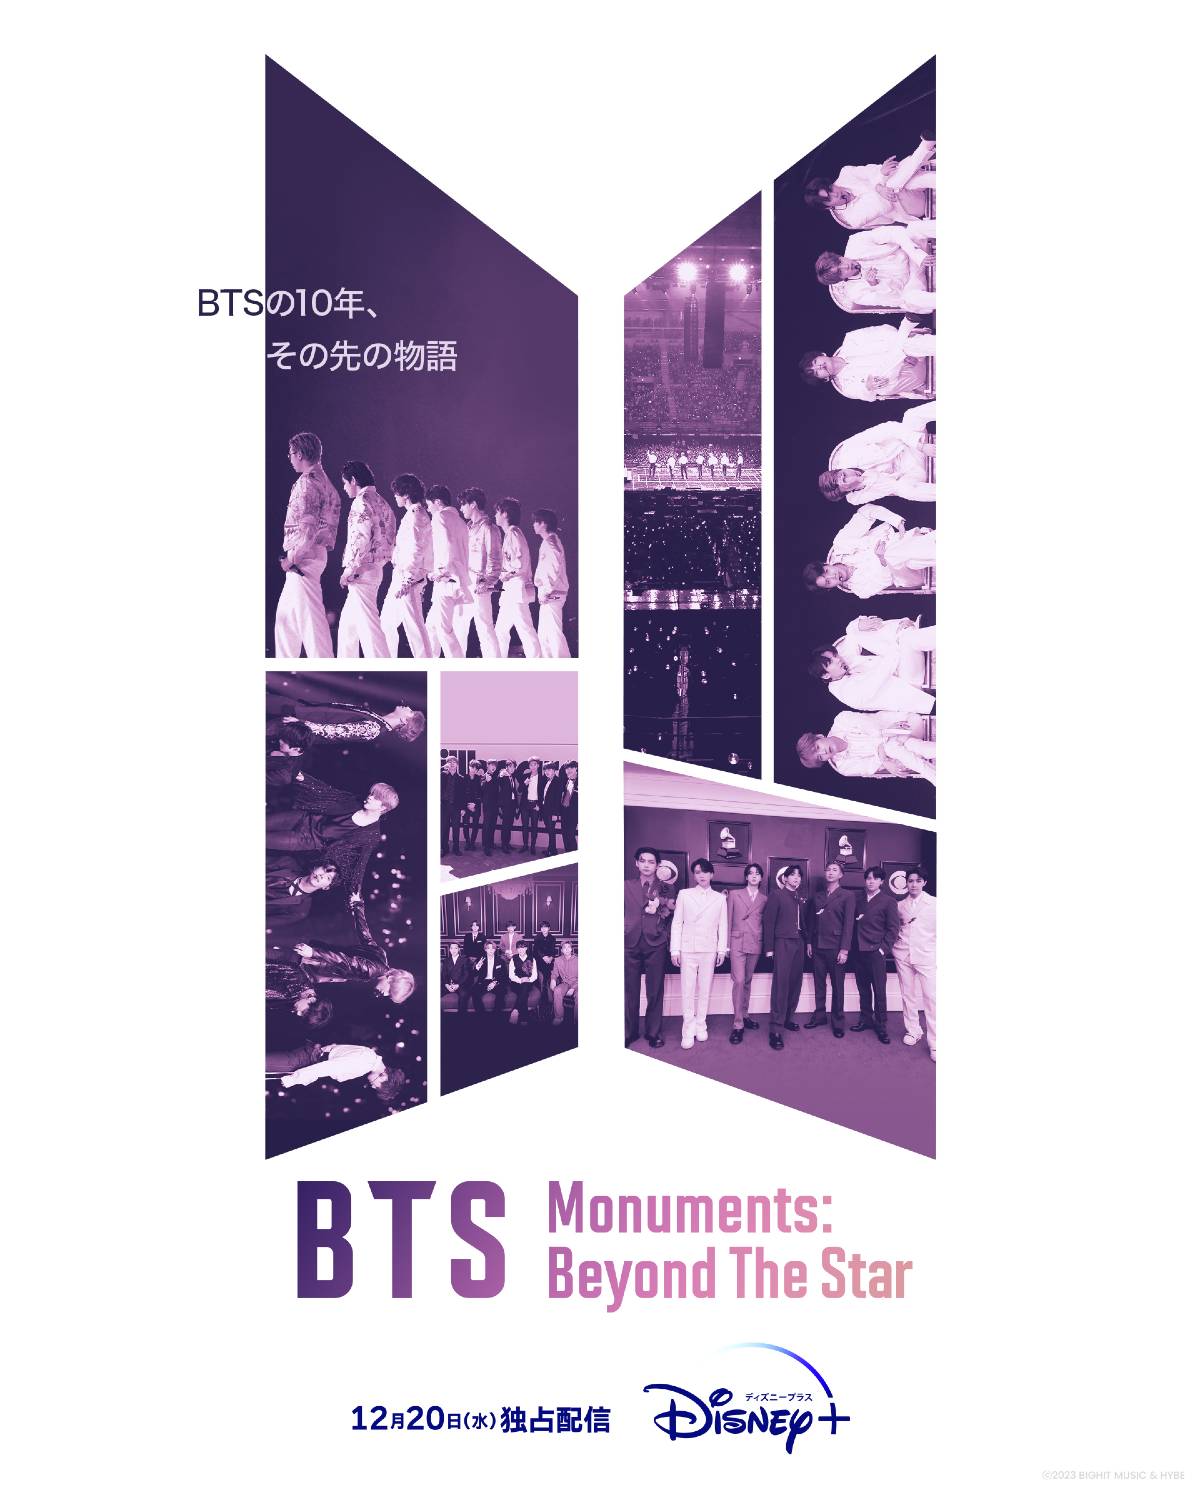 「BTS Monuments: Beyond The Star」